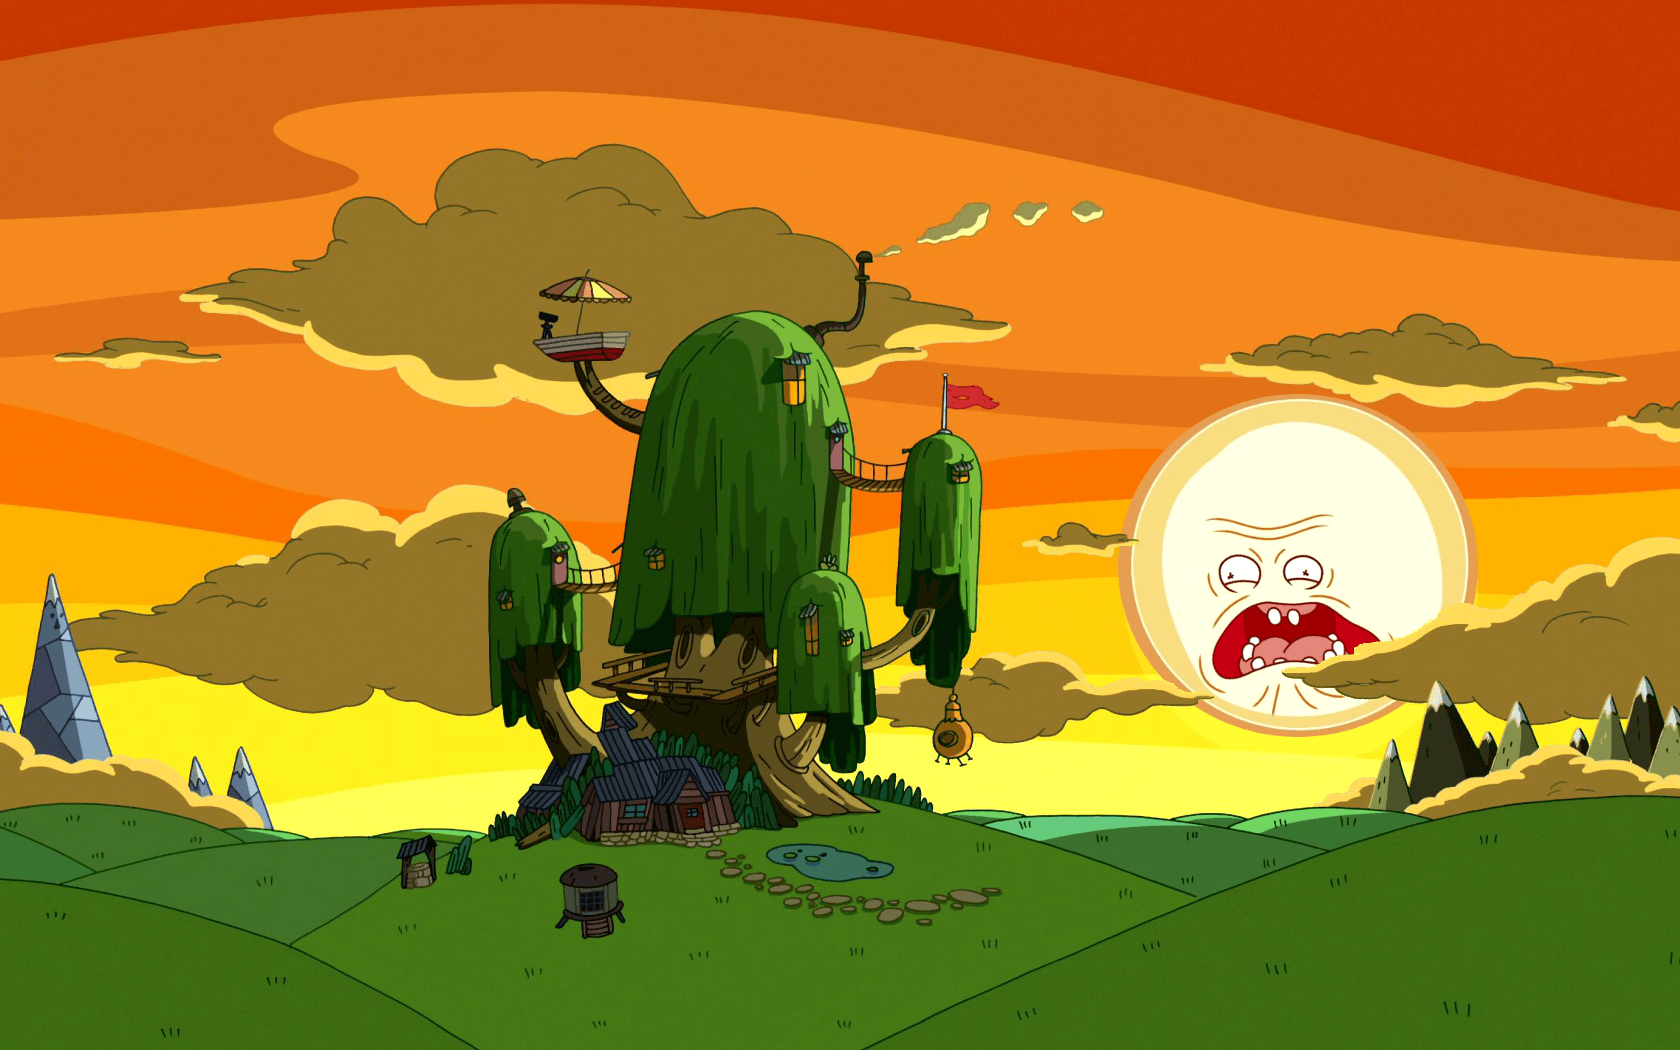 I made a Rick and Morty/Adventure Time wallpapers for those who are